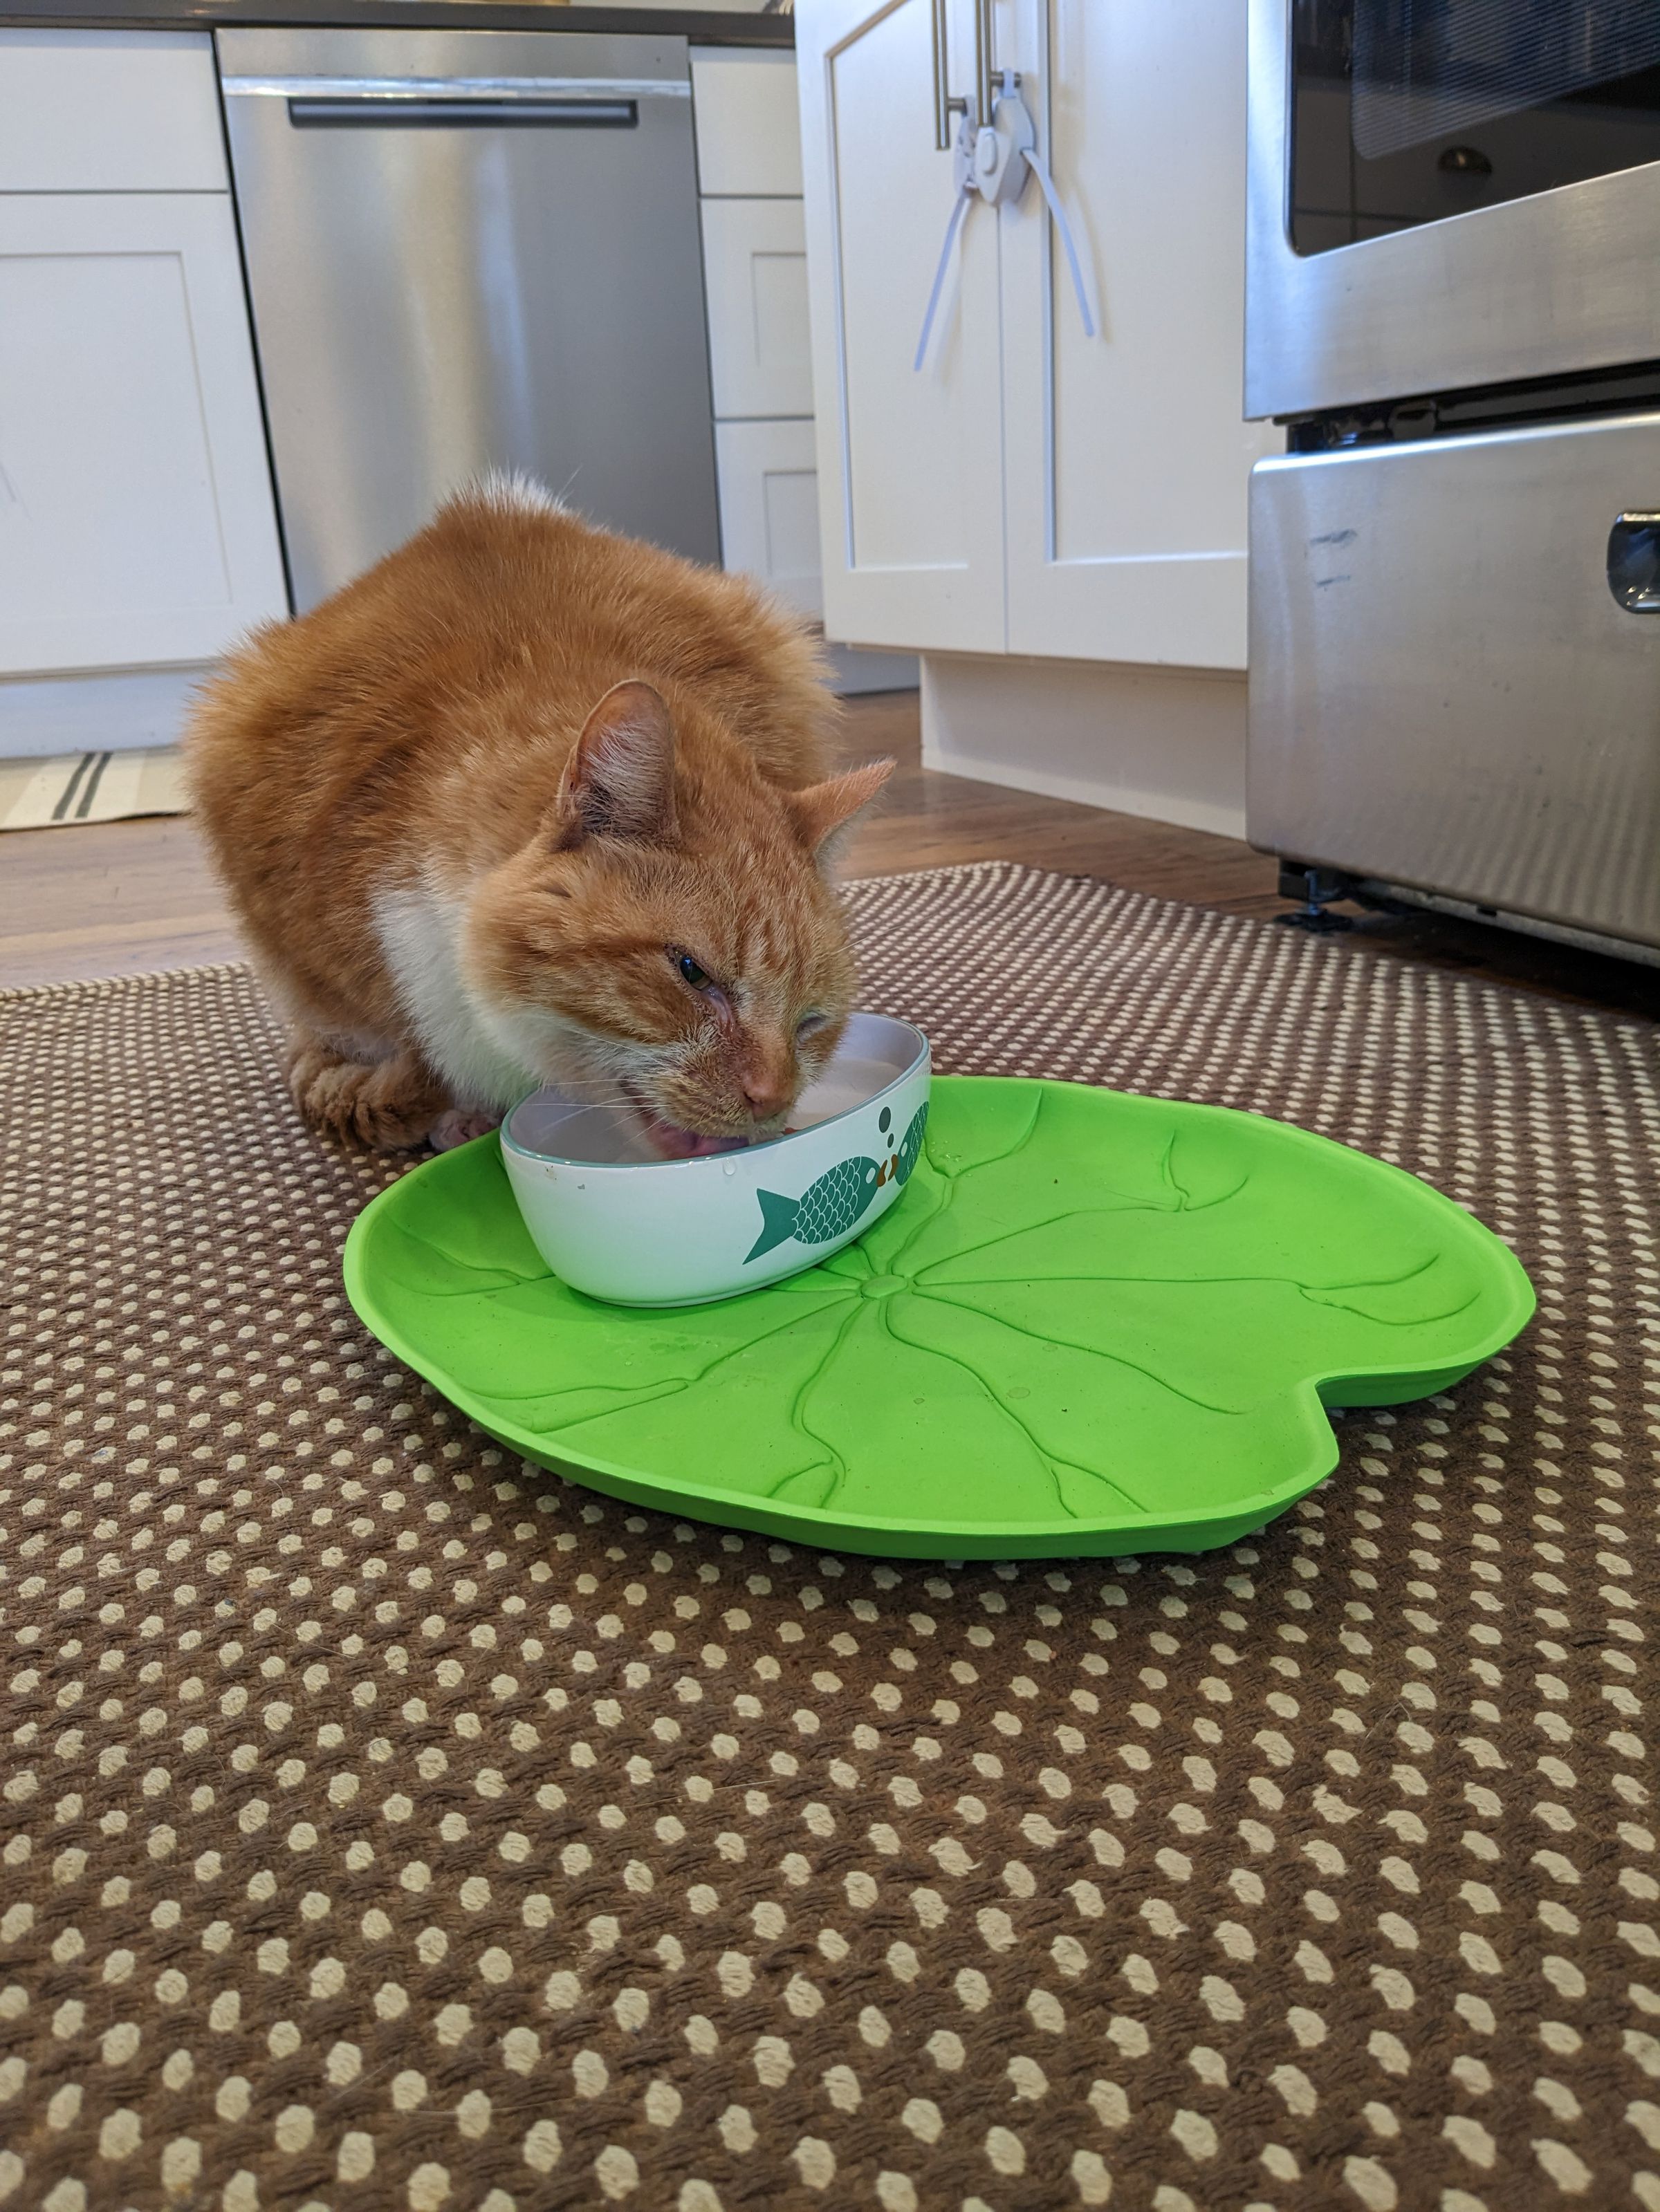 Photo of a cat drinking from a bowl from Pixel 6A. More fine detail is visible in the fur.